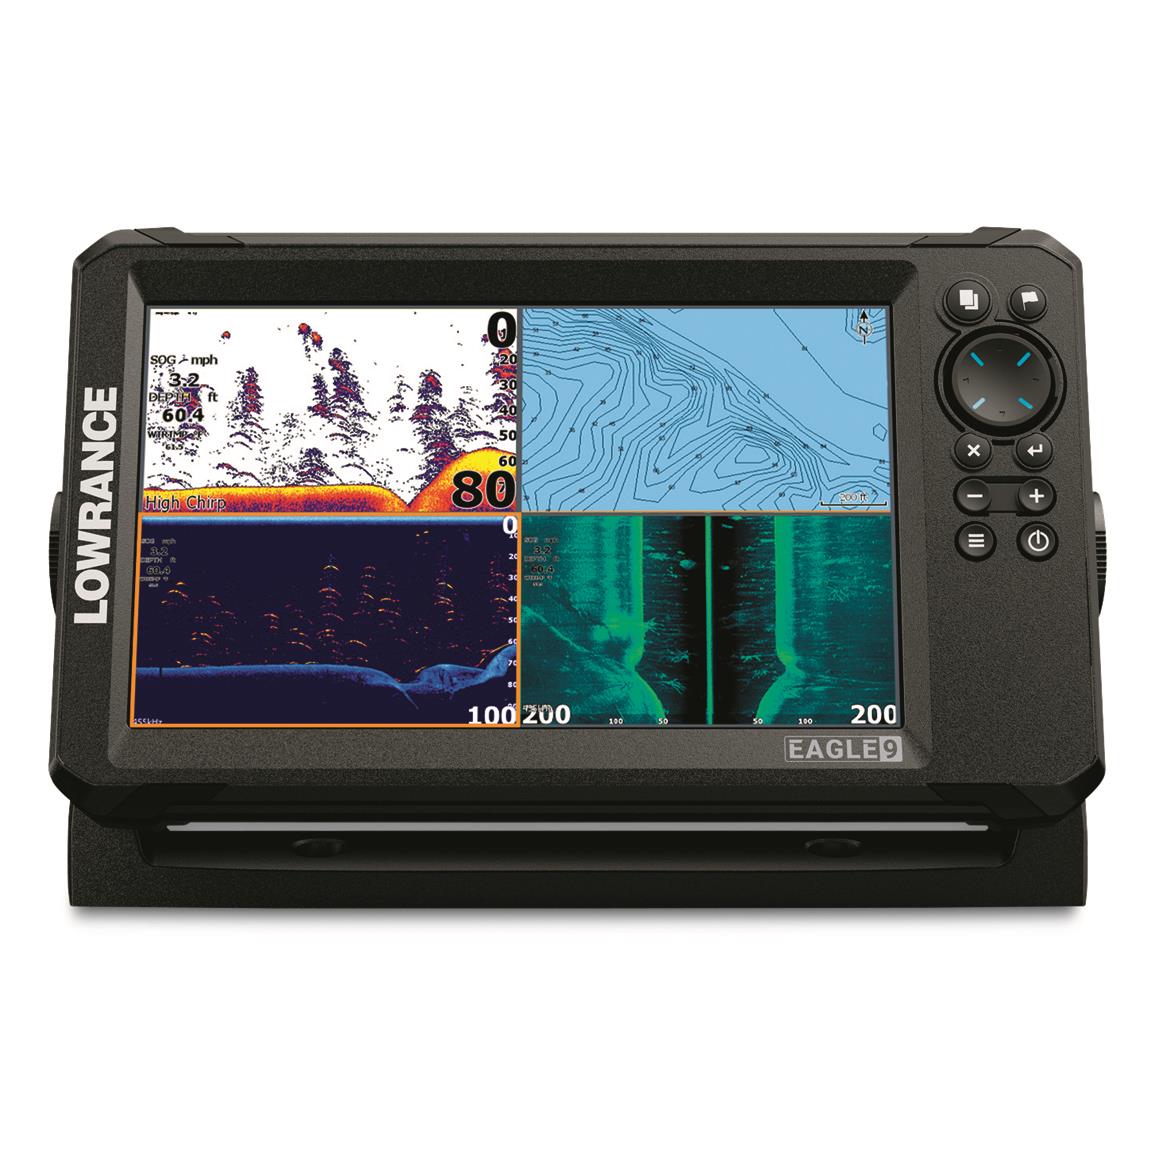 Lowrance Eagle 9 TripleShot Fishfinder with U.S. Inland Mapping - 740785,  Fish Finders at Sportsman's Guide